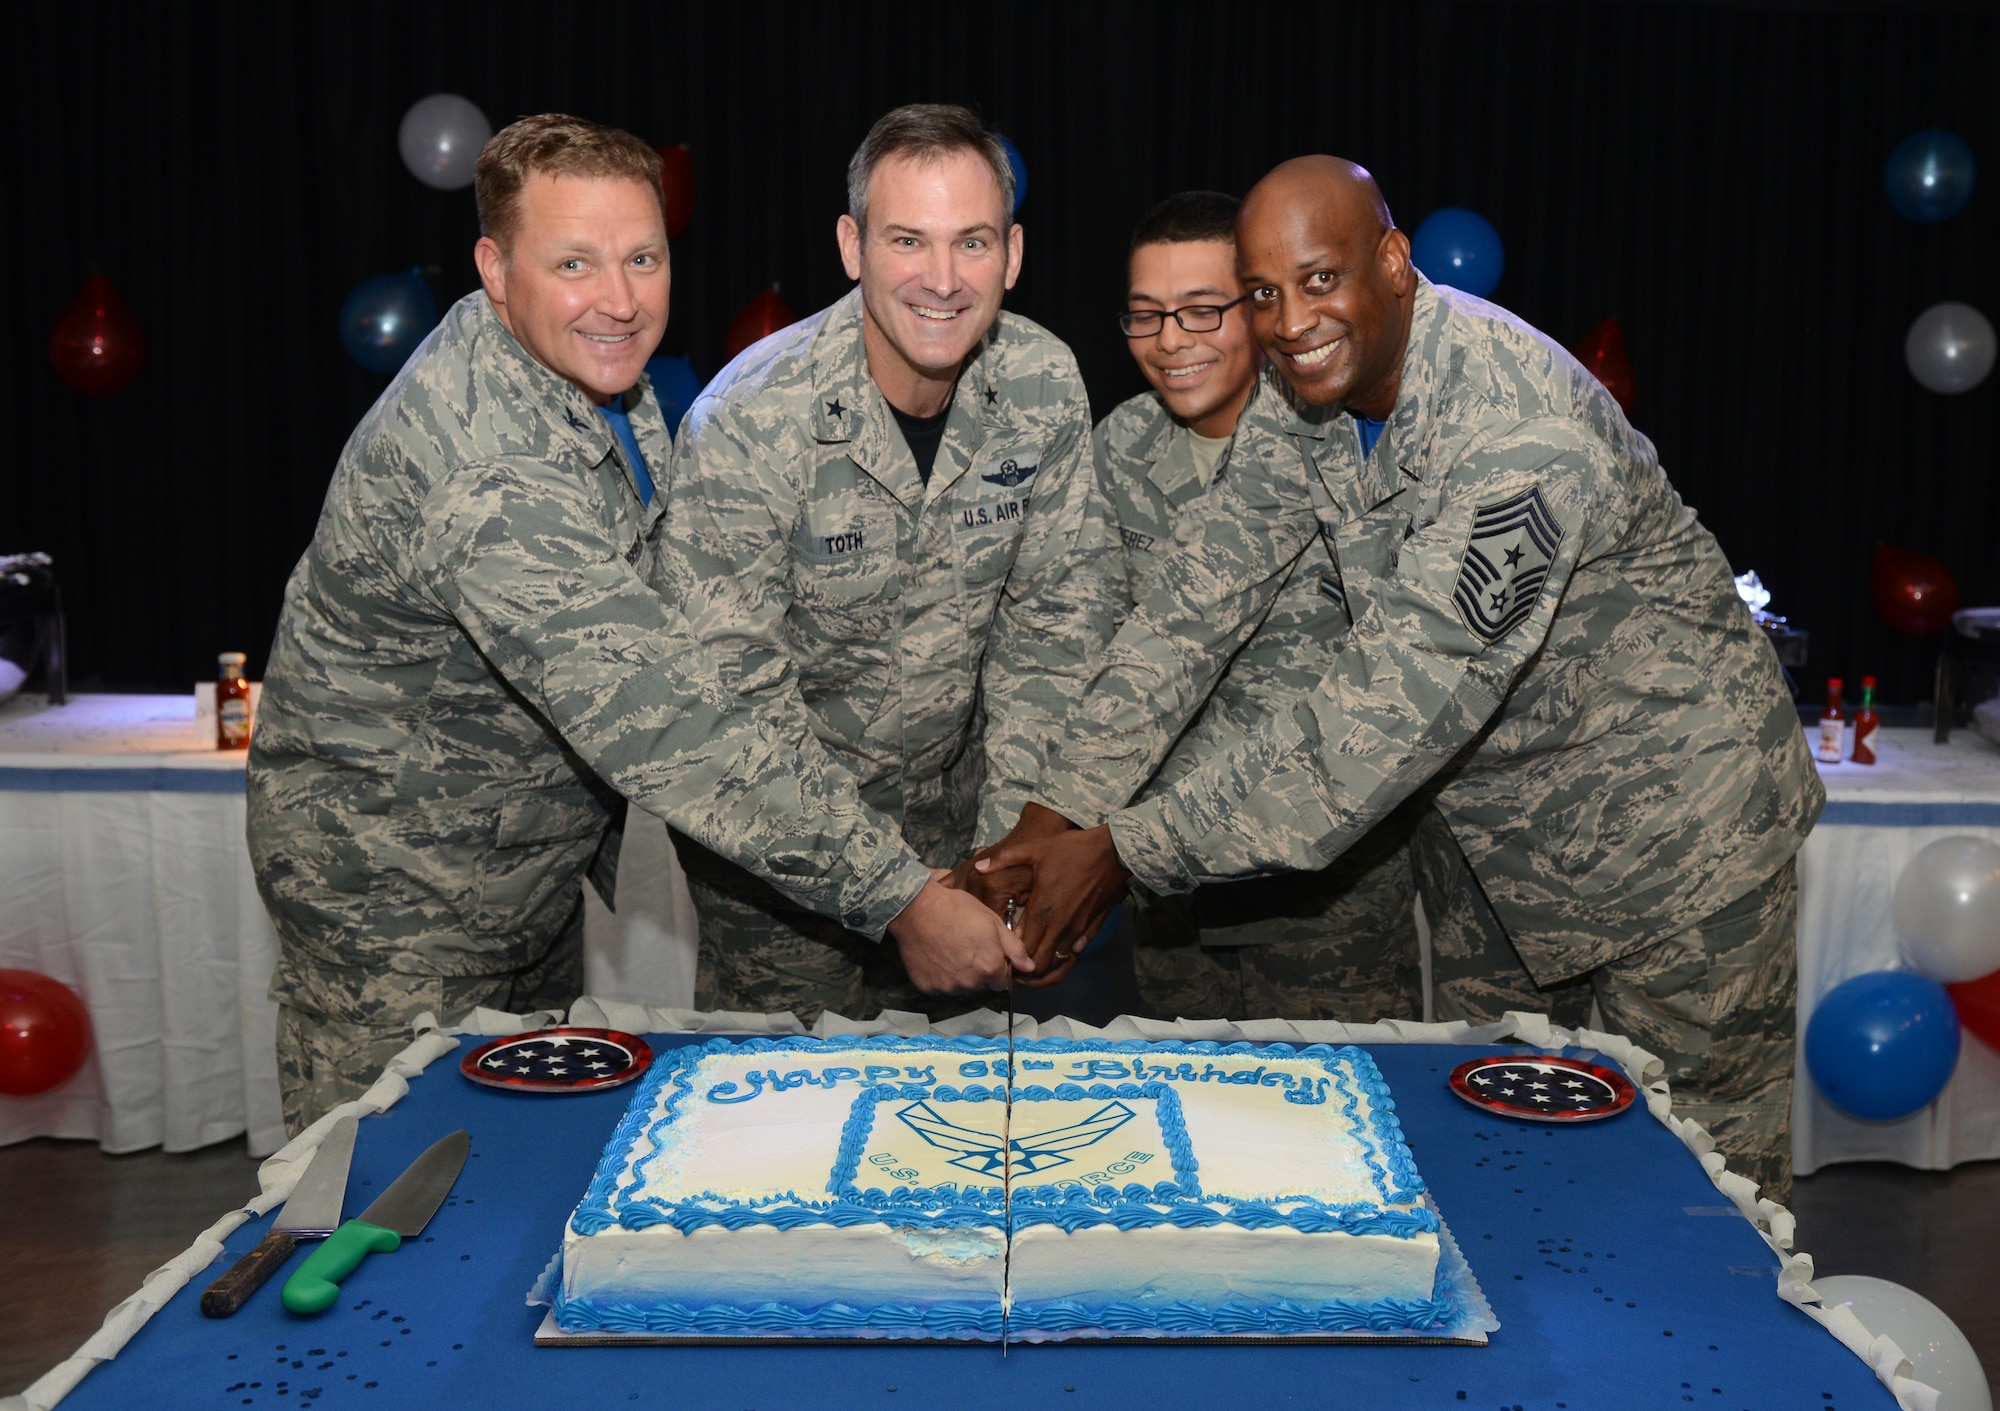 36th Wing leadership cut a cake with Airman 1st Class Mario Perez, 36th Force Support Squadron, during the 68th Air Force birthday celebration at the Top of the Rock dining facility Sept. 18, 2015, on Andersen Air Force Base, Guam. The birthday event celebrated the creation of the U.S. Air Force as an independent service in 1947, when the Air Force separated from the Army Air Forces. (U.S. Air Force photo by Airman 1st Class Arielle Vasquez/Released)